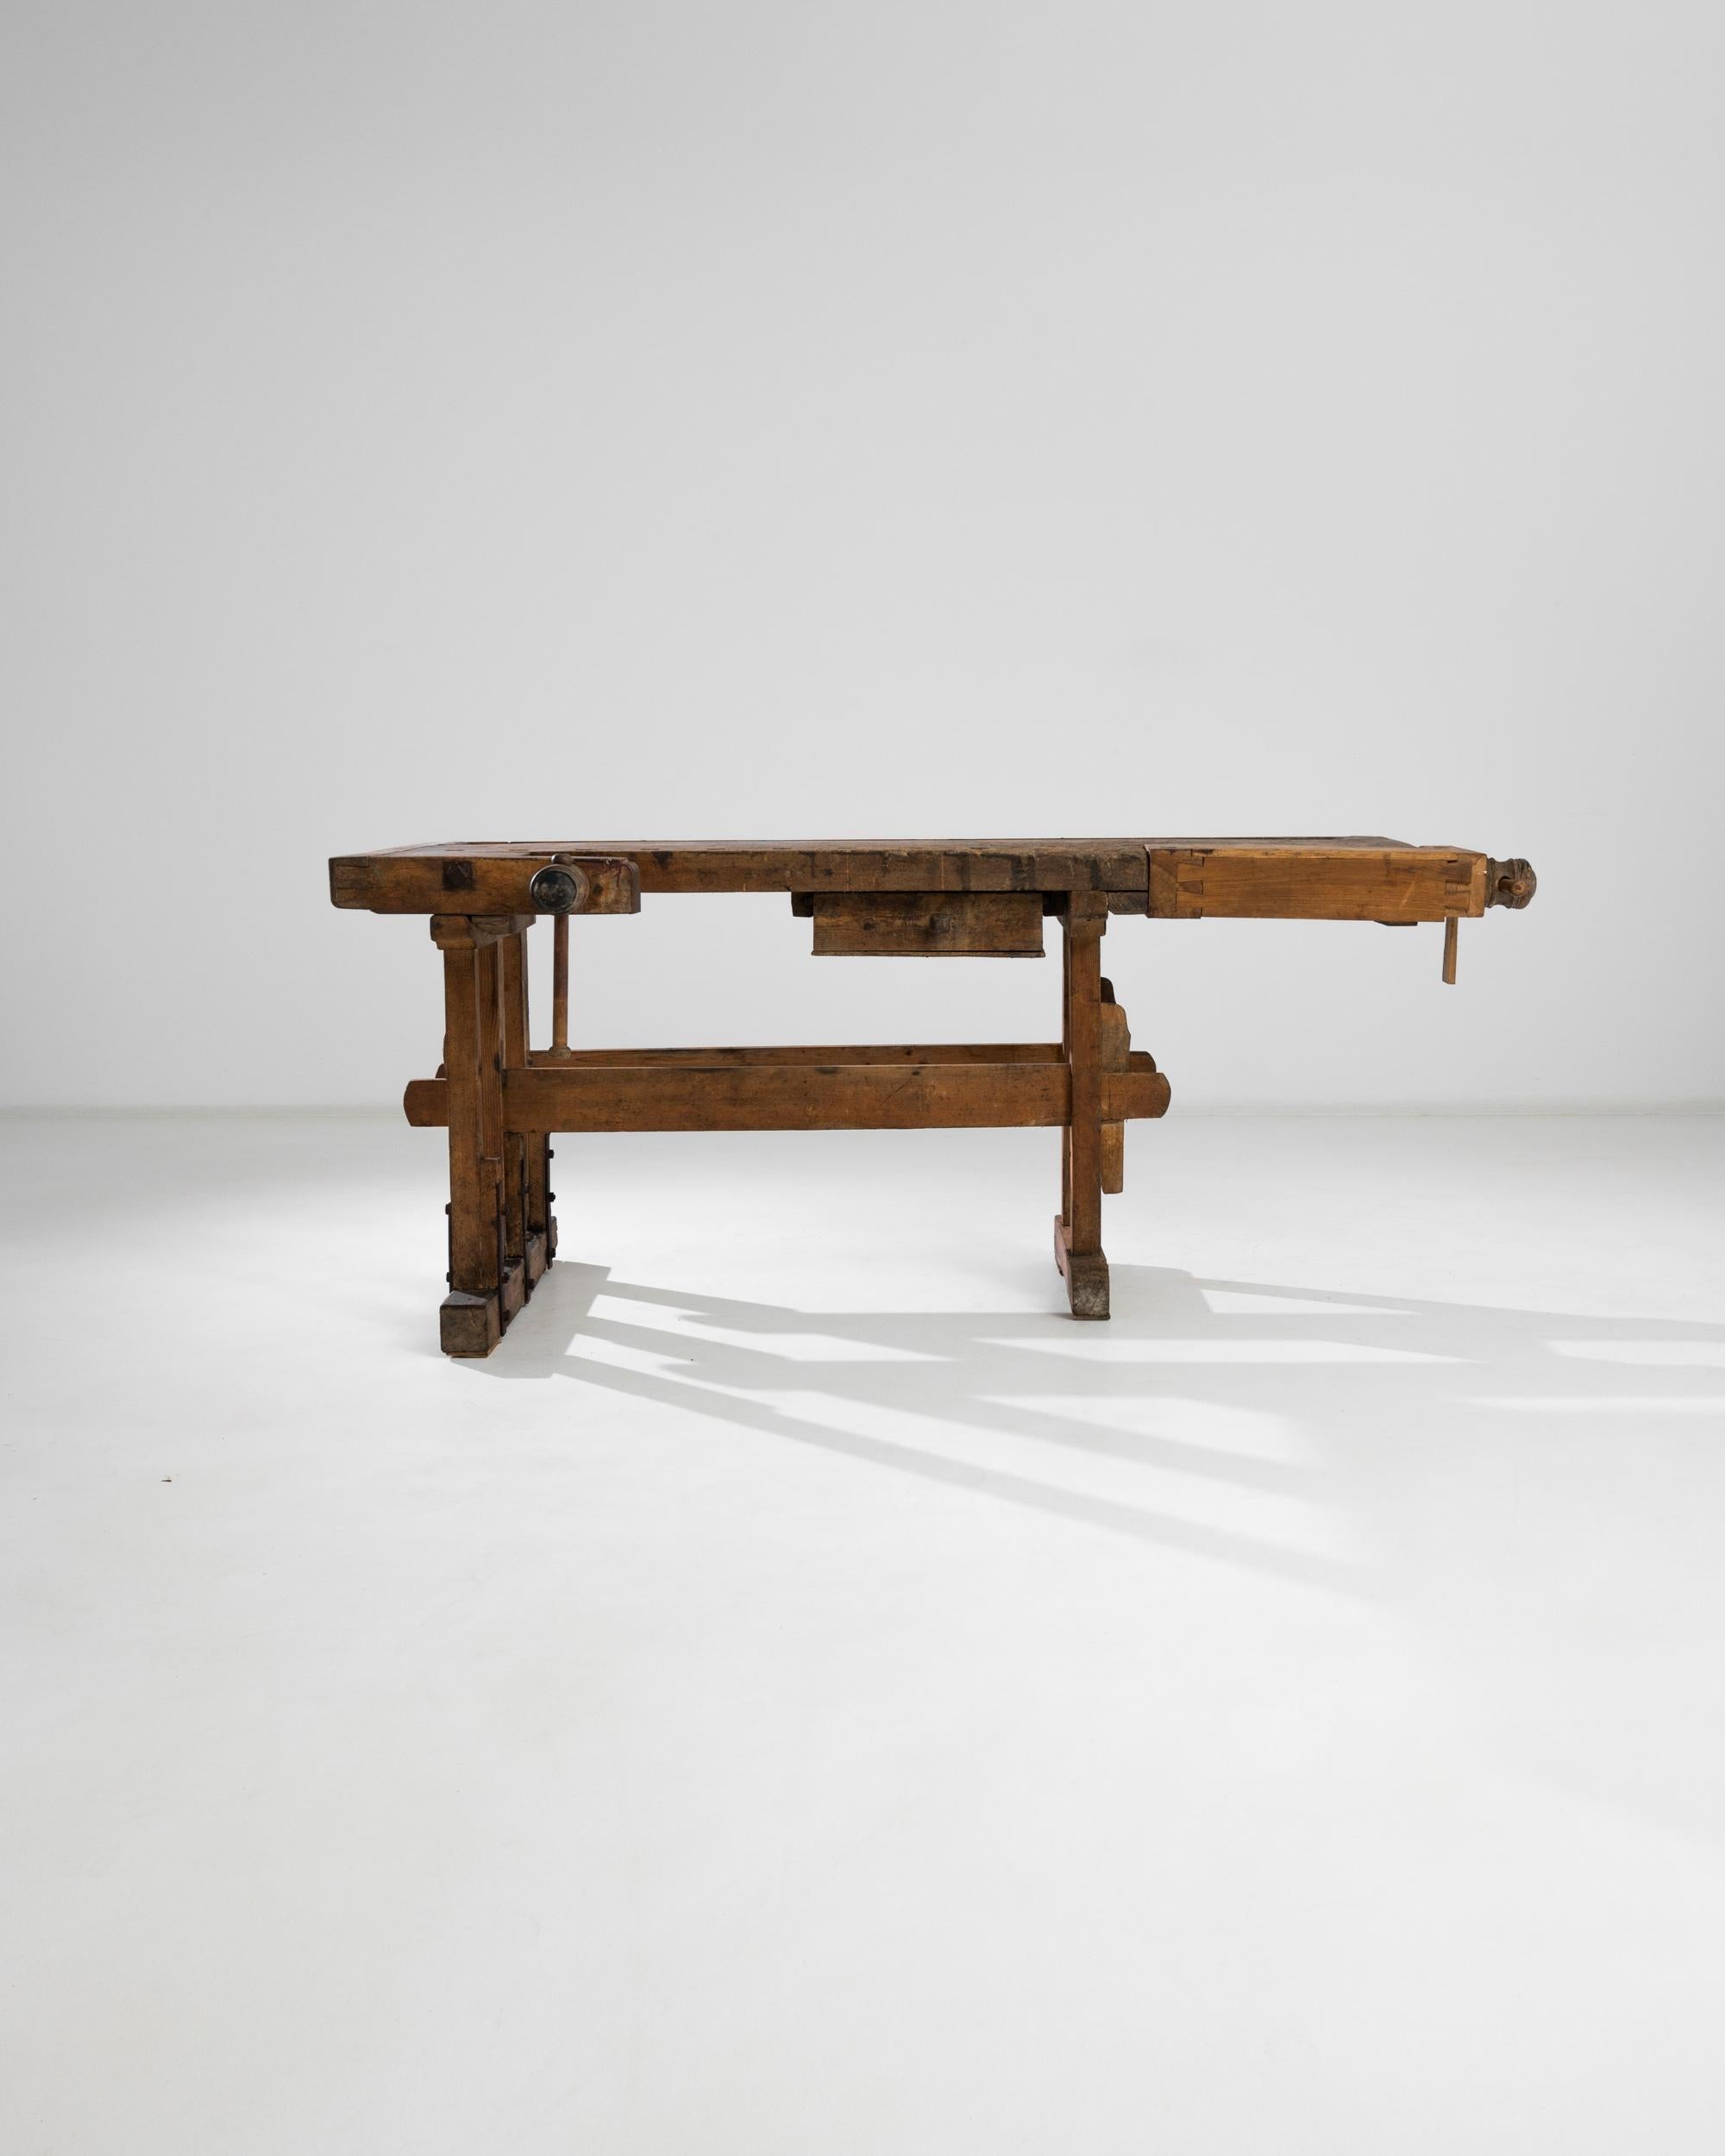 A 20th century woodworking workbench from Central Europe, this mechanical jewel bears the marks of skilled craftsmanship. This antique wooden carpenter’s workbench displays English dovetail hewn joints, two wooden working screw vices, a deep tray